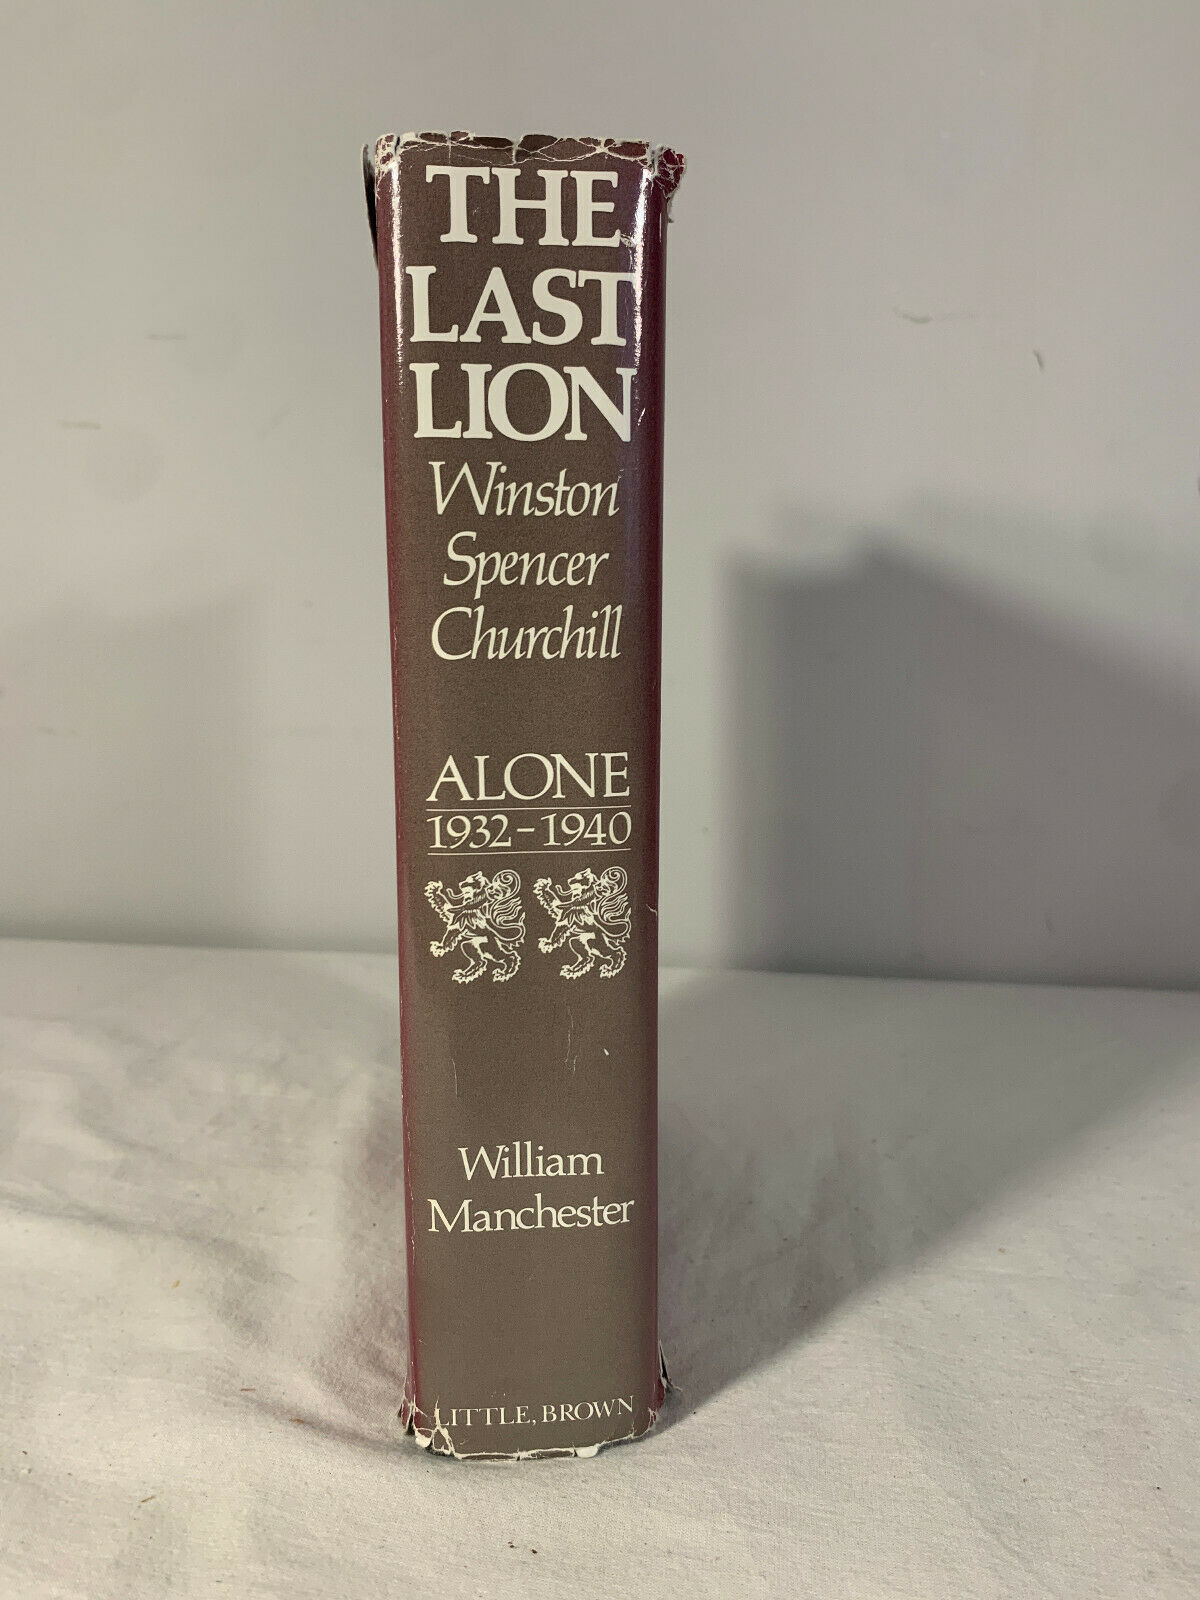 The Last Lion Winston Spencer Churchill Alone, 1932-1940 by William Manchester